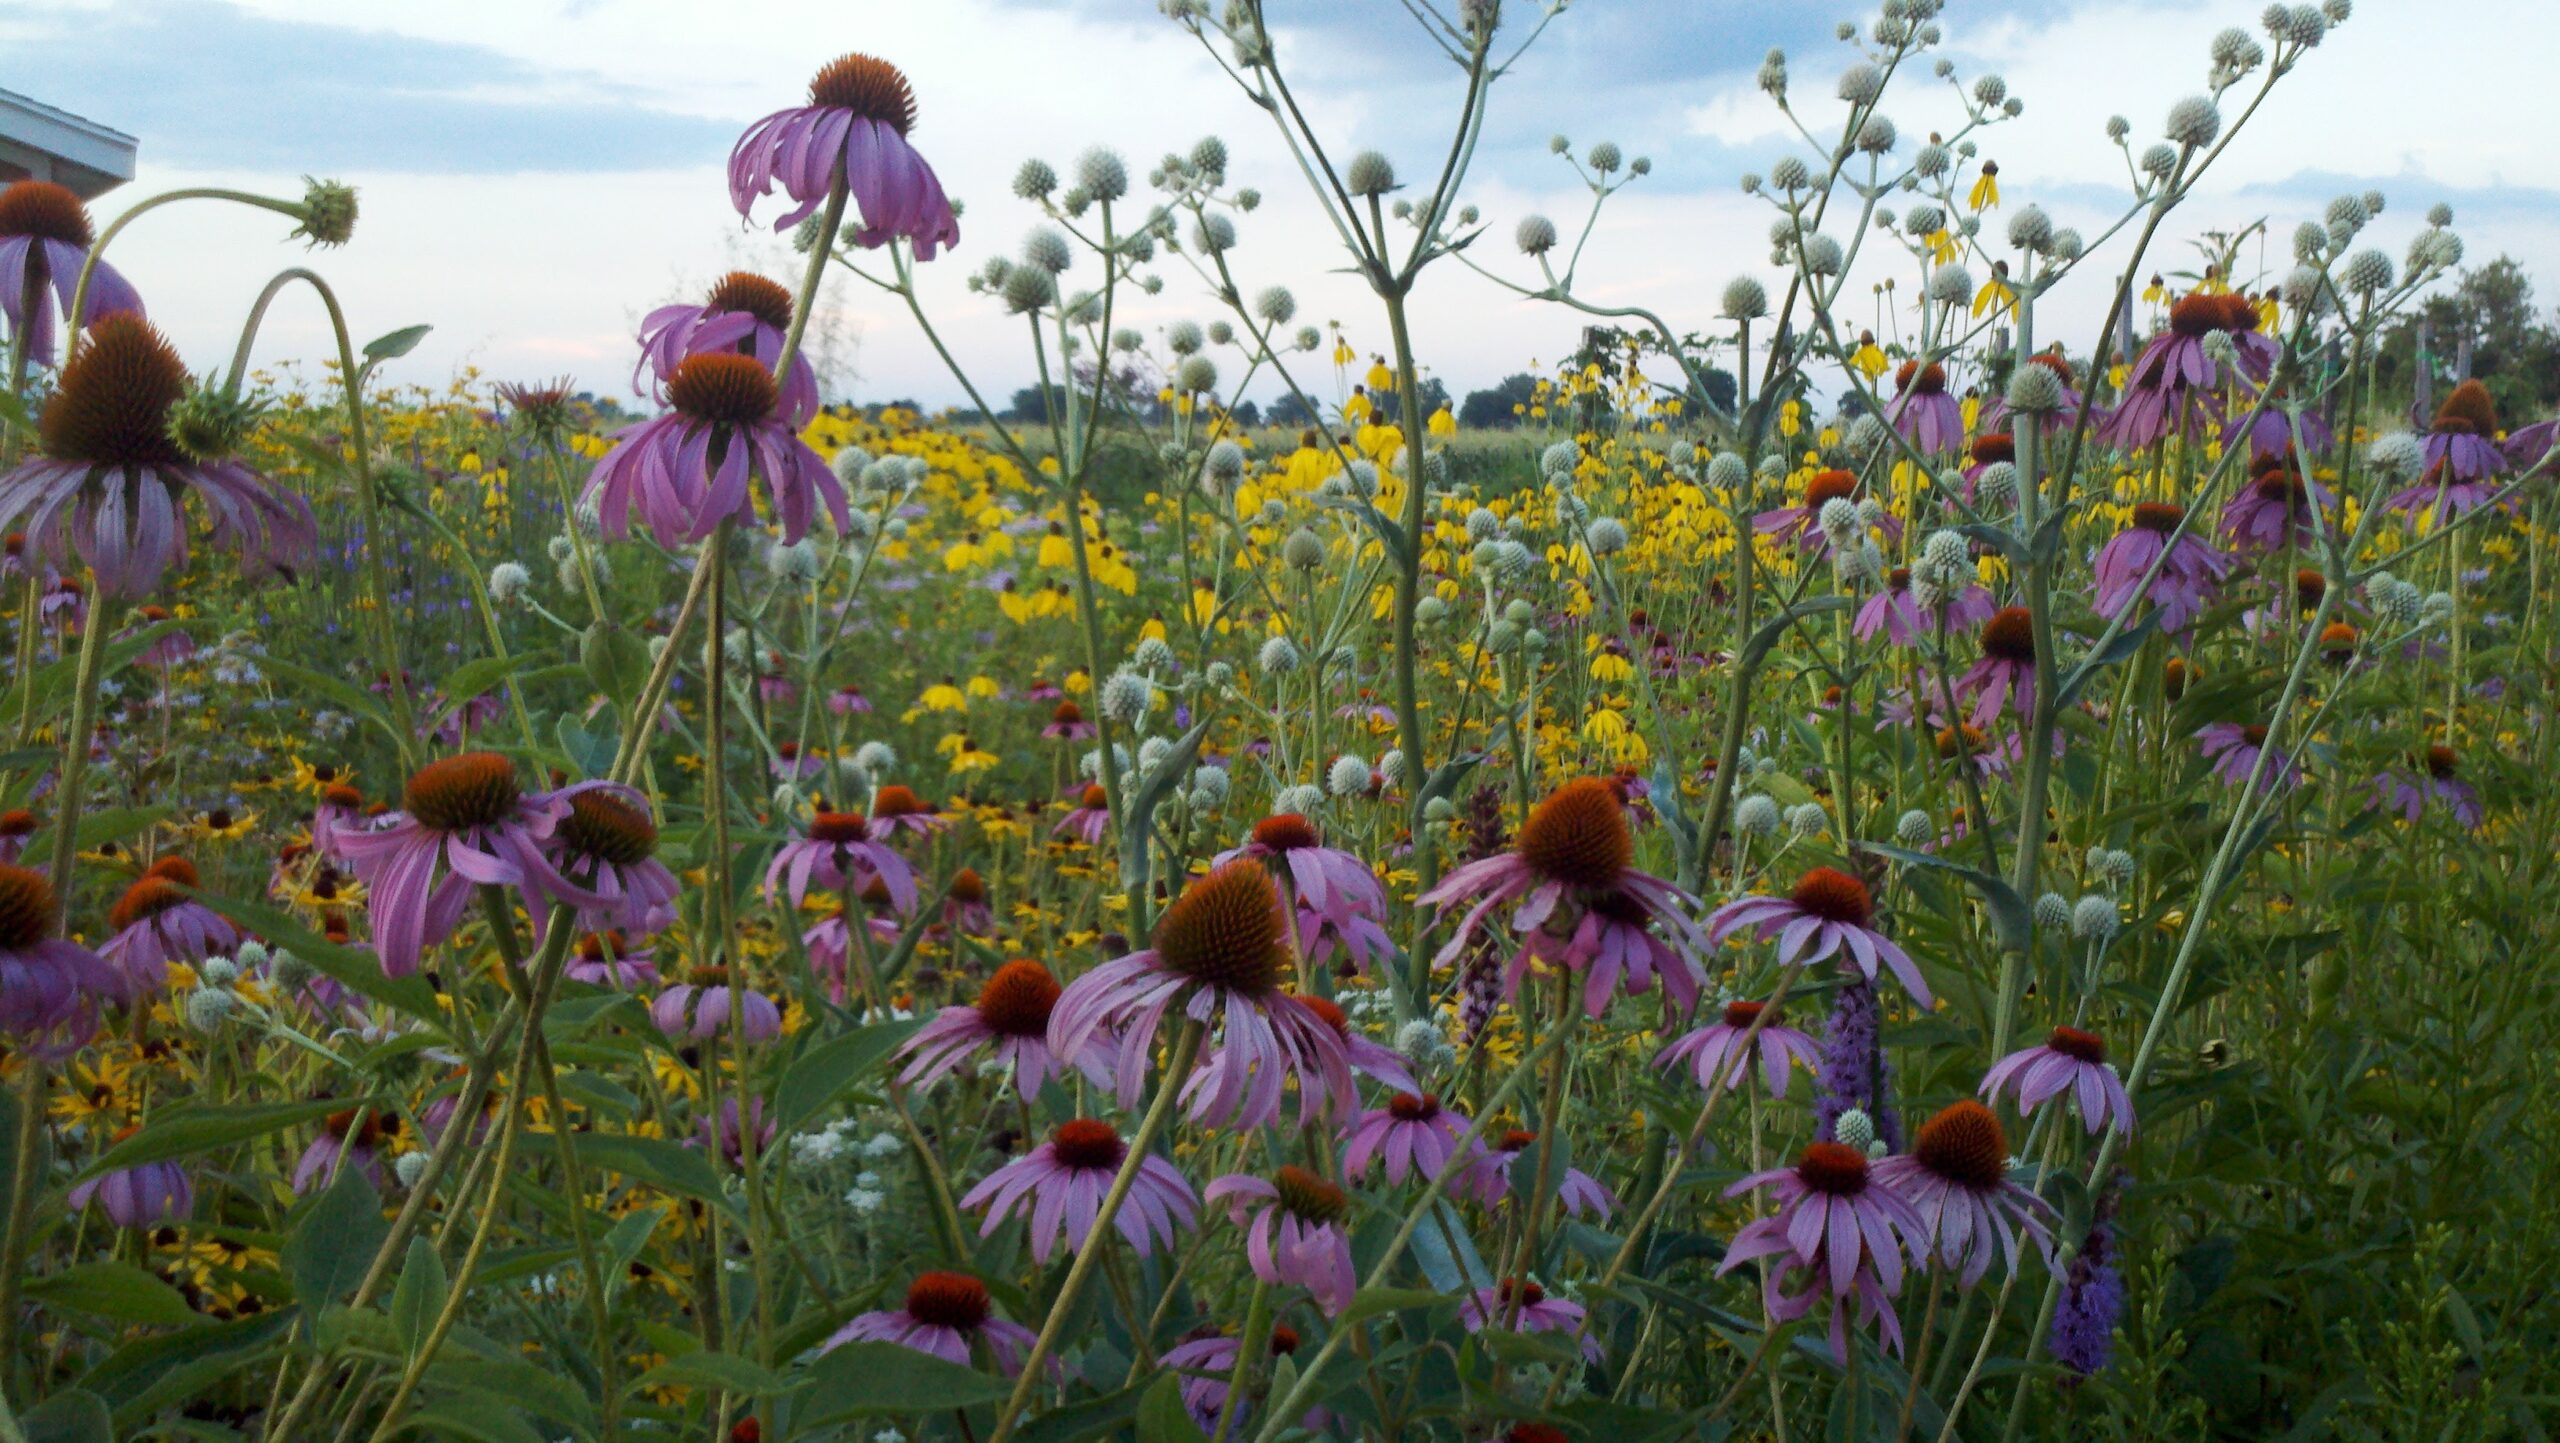 The Gardener’s Guide to Prairie Plants with Neil Diboll and Hilary Cox